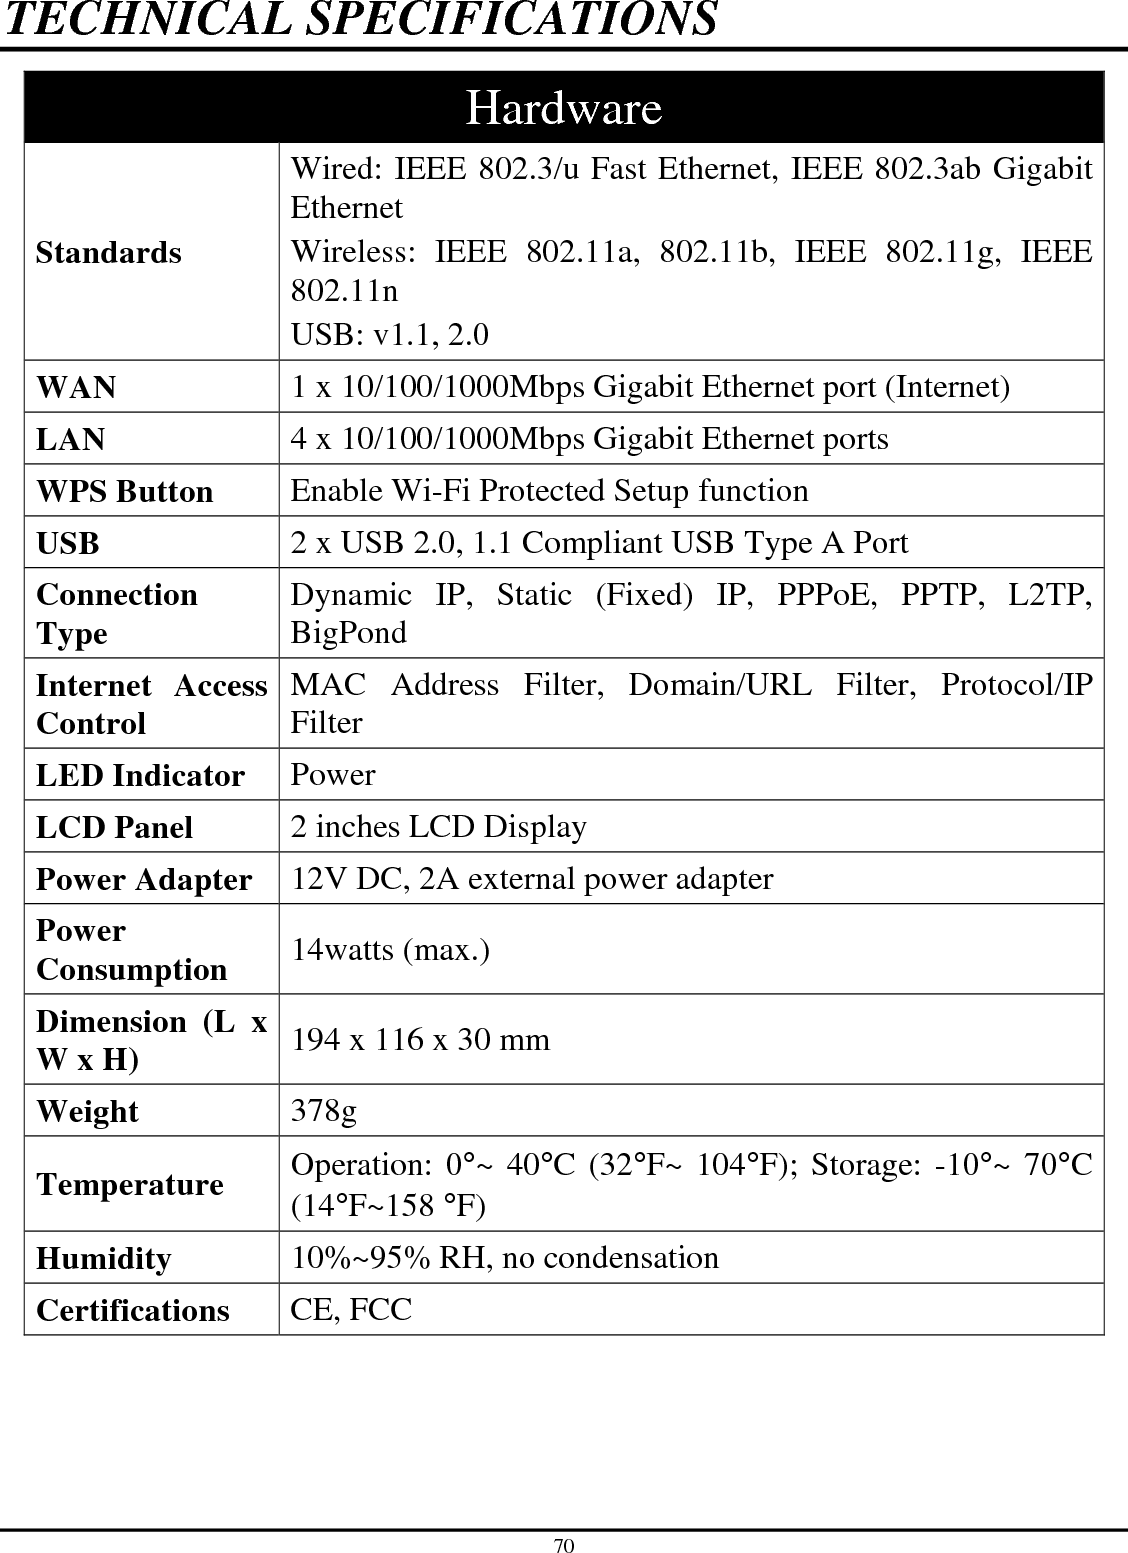 70 TECHNICAL SPECIFICATIONS Hardware Standards Wired: IEEE 802.3/u Fast Ethernet, IEEE 802.3ab Gigabit Ethernet Wireless:  IEEE  802.11a,  802.11b,  IEEE  802.11g,  IEEE 802.11n USB: v1.1, 2.0 WAN  1 x 10/100/1000Mbps Gigabit Ethernet port (Internet) LAN  4 x 10/100/1000Mbps Gigabit Ethernet ports WPS Button  Enable Wi-Fi Protected Setup function USB  2 x USB 2.0, 1.1 Compliant USB Type A Port Connection Type  Dynamic  IP,  Static  (Fixed)  IP,  PPPoE,  PPTP,  L2TP, BigPond Internet  Access Control  MAC  Address  Filter,  Domain/URL  Filter,  Protocol/IP Filter LED Indicator  Power LCD Panel  2 inches LCD Display Power Adapter  12V DC, 2A external power adapter Power Consumption  14watts (max.) Dimension  (L  x W x H)  194 x 116 x 30 mm Weight  378g Temperature  Operation: 0°~ 40°C (32°F~ 104°F); Storage: -10°~ 70°C (14°F~158 °F) Humidity  10%~95% RH, no condensation Certifications  CE, FCC 